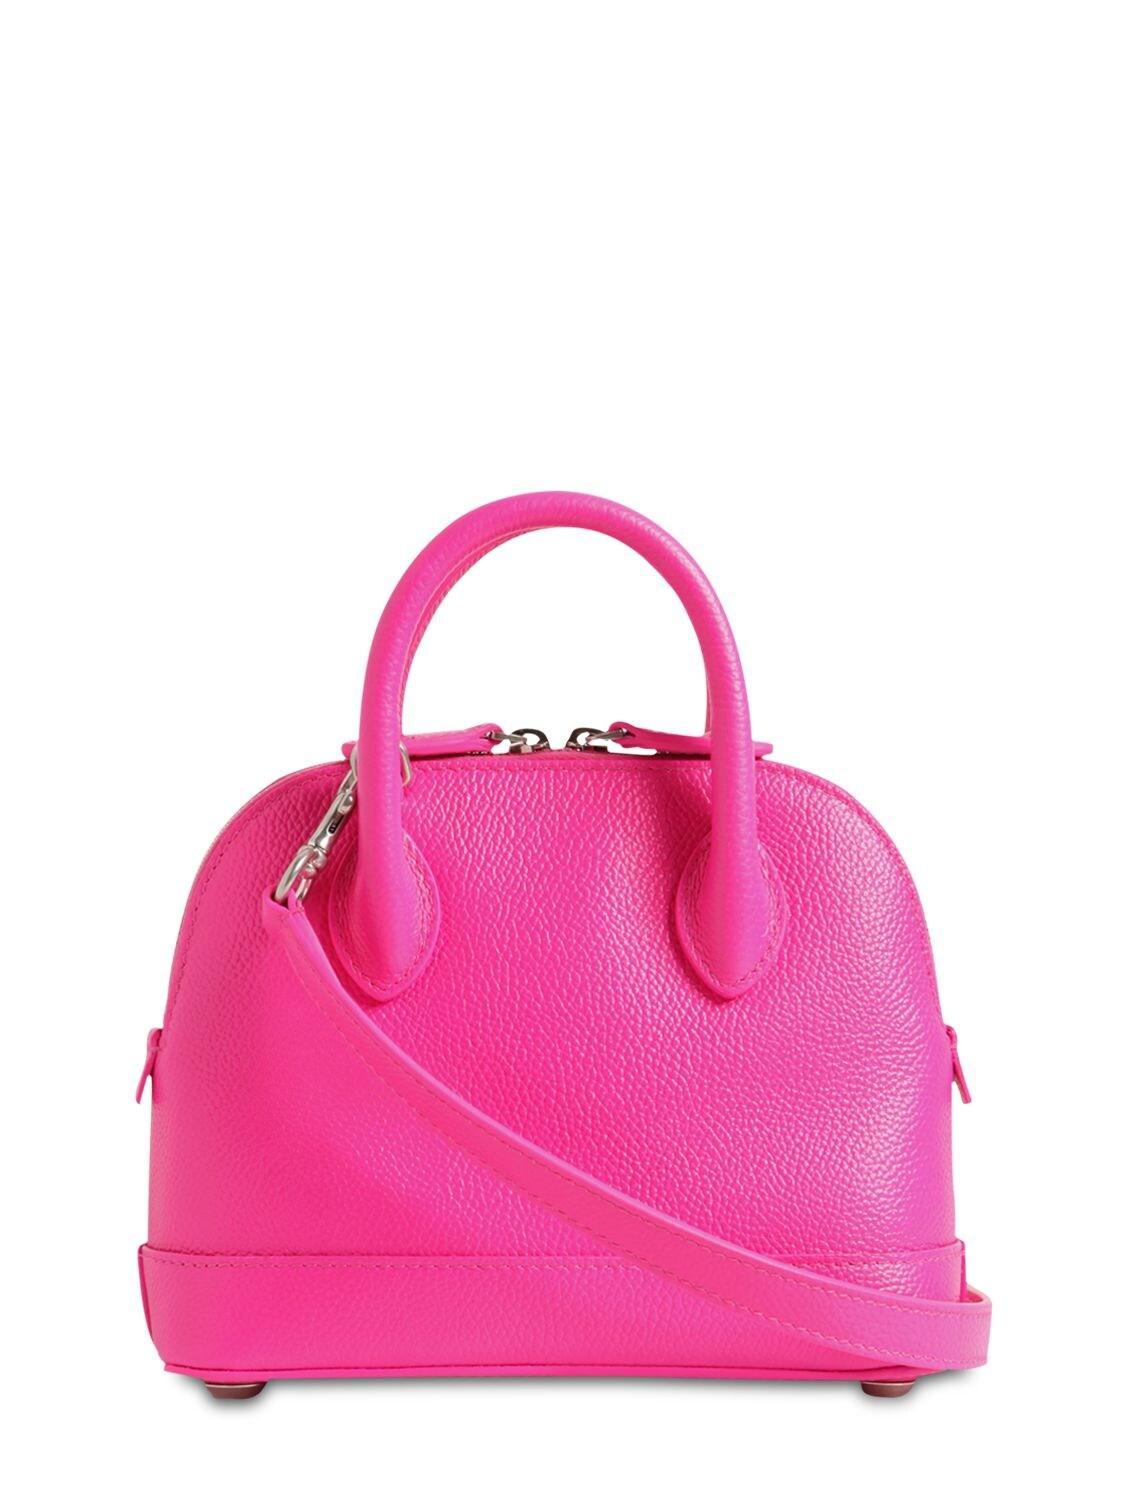 Balenciaga Xxs Ville Leather Top Handle Bag in Pink | Lyst Canada